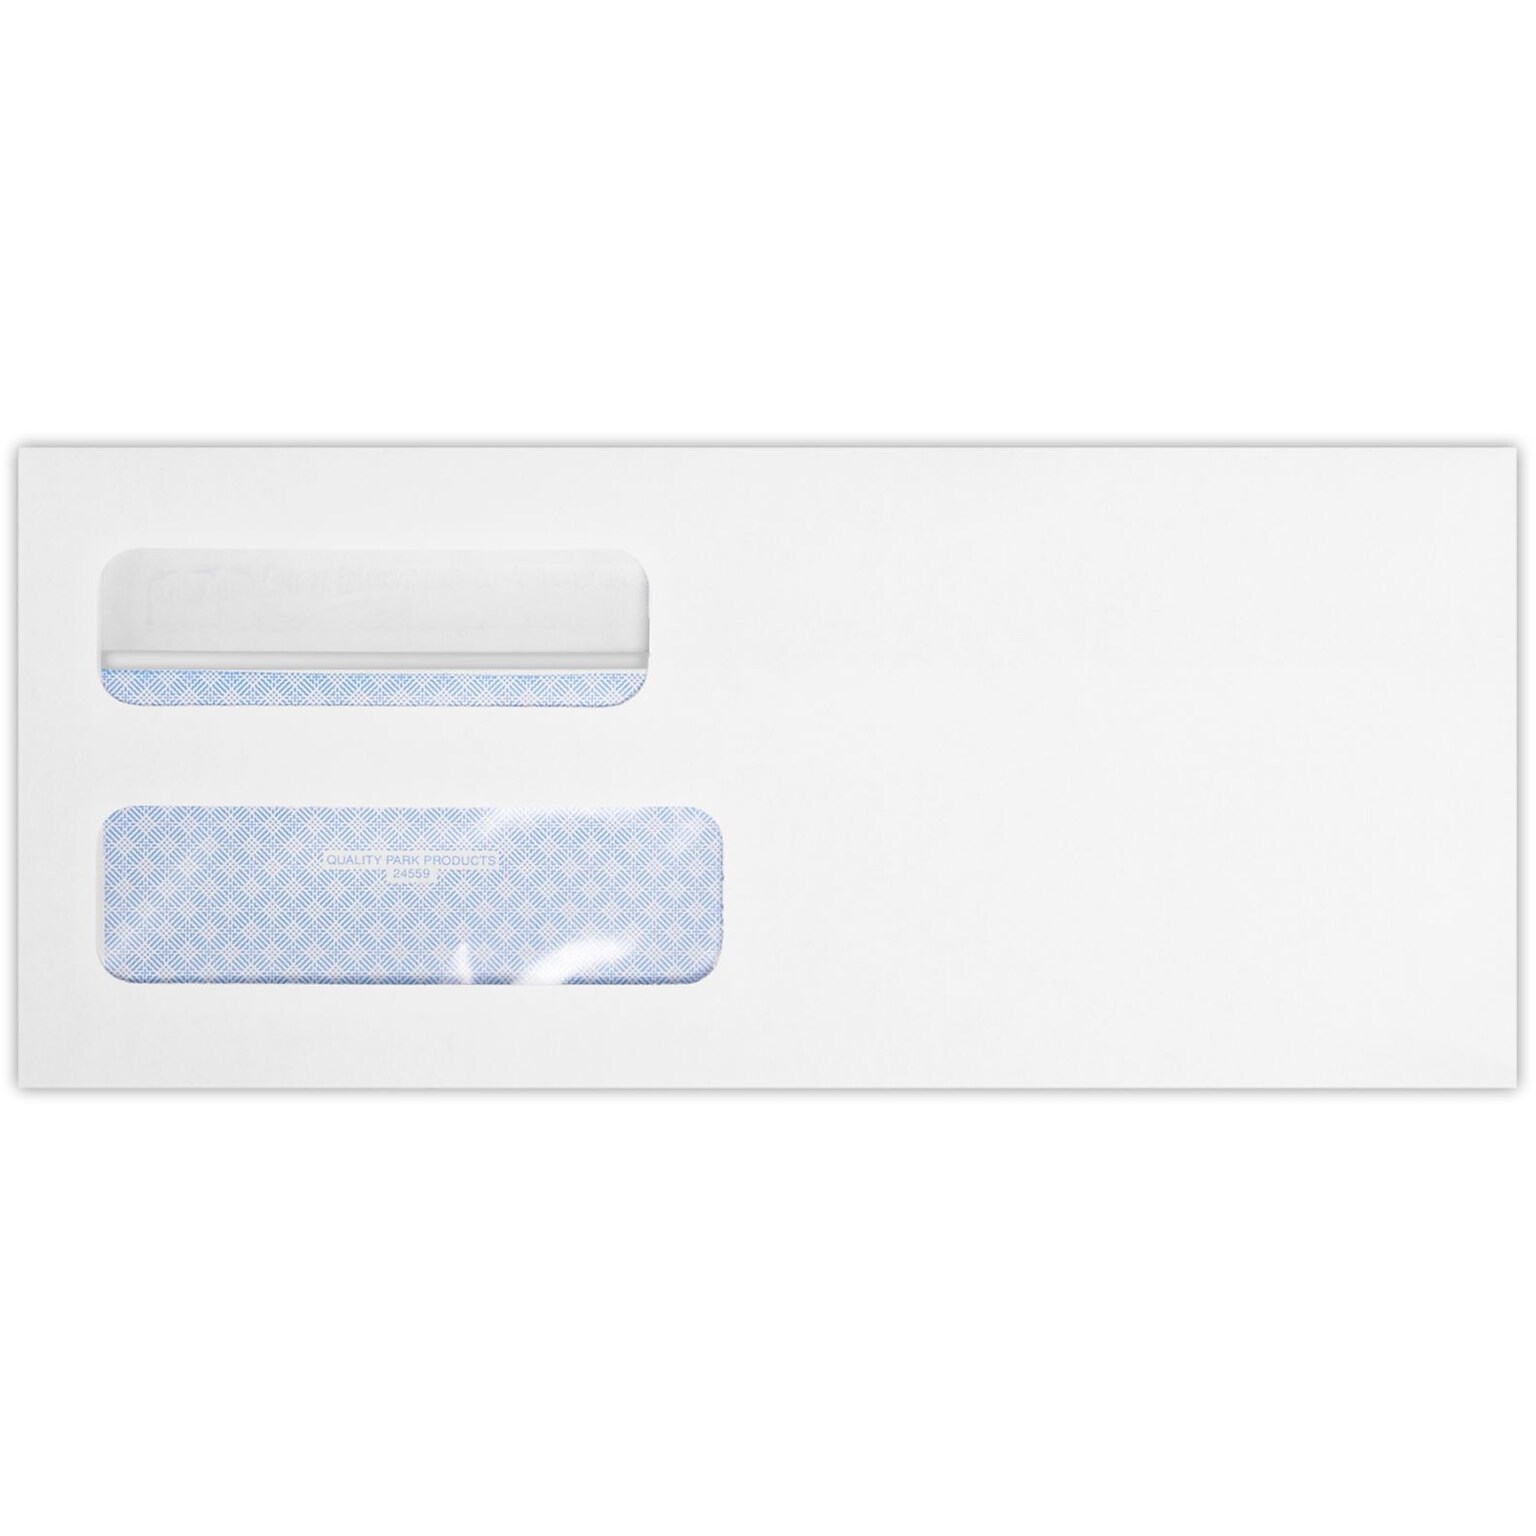 Quality Park Redi-Seal Self Seal Security Tinted #10 Double Window Envelope, 4 1/2 x 9 1/2, White Wove, 50/Pack (24559-QP-50)